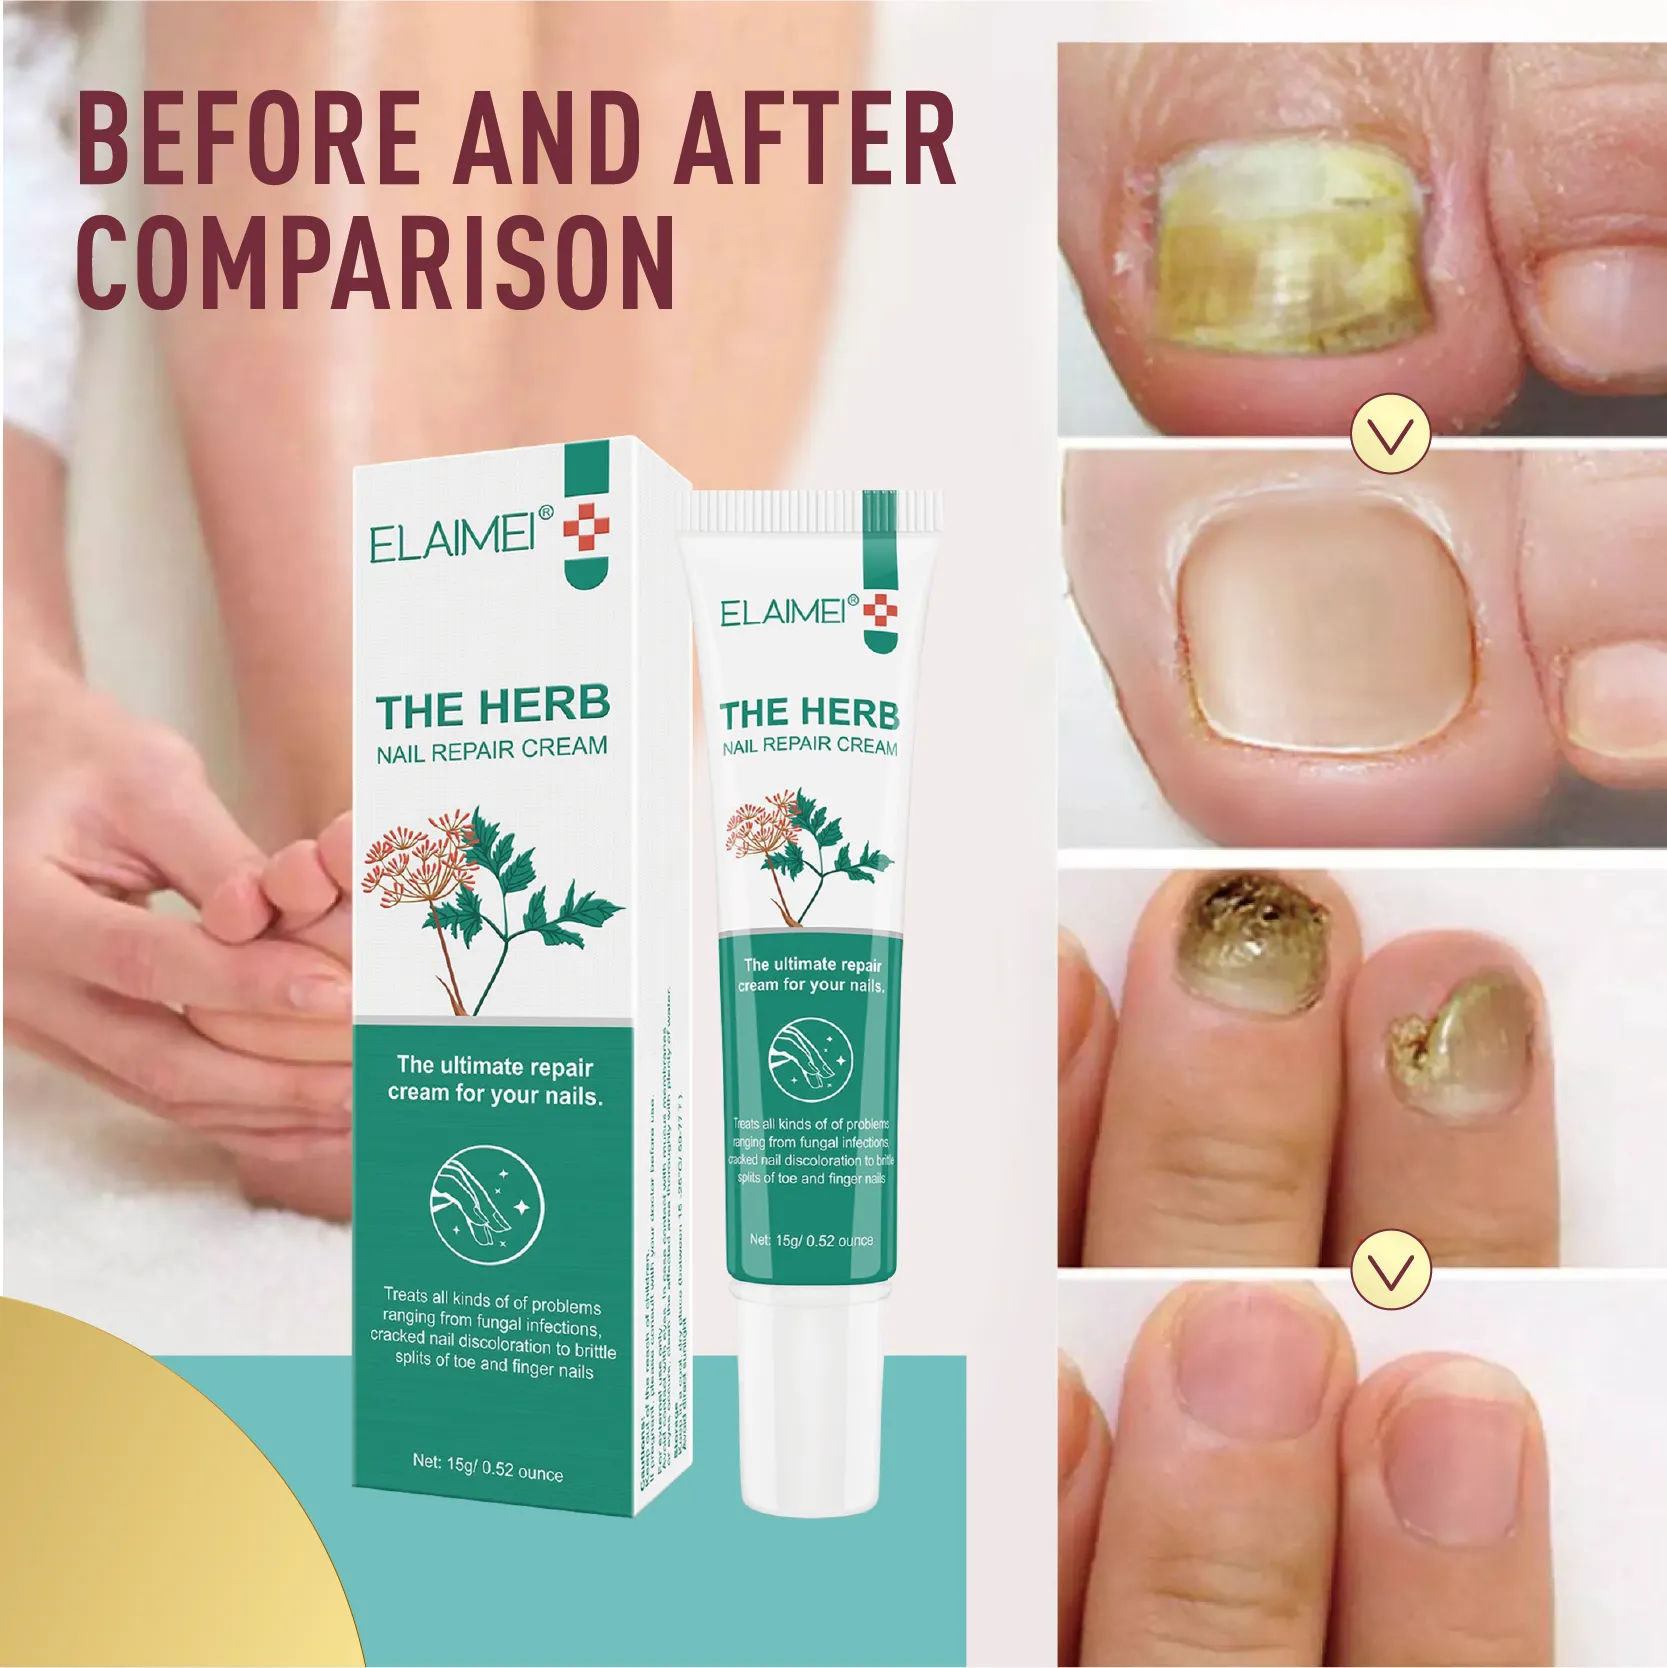 Tea Tree Oil For Nail Fungus: Effectiveness, How To Use, And Side Effects |  Herbal Essence Antibacterial Nail Treatments Essential Oil Nails Fungus  Repair 